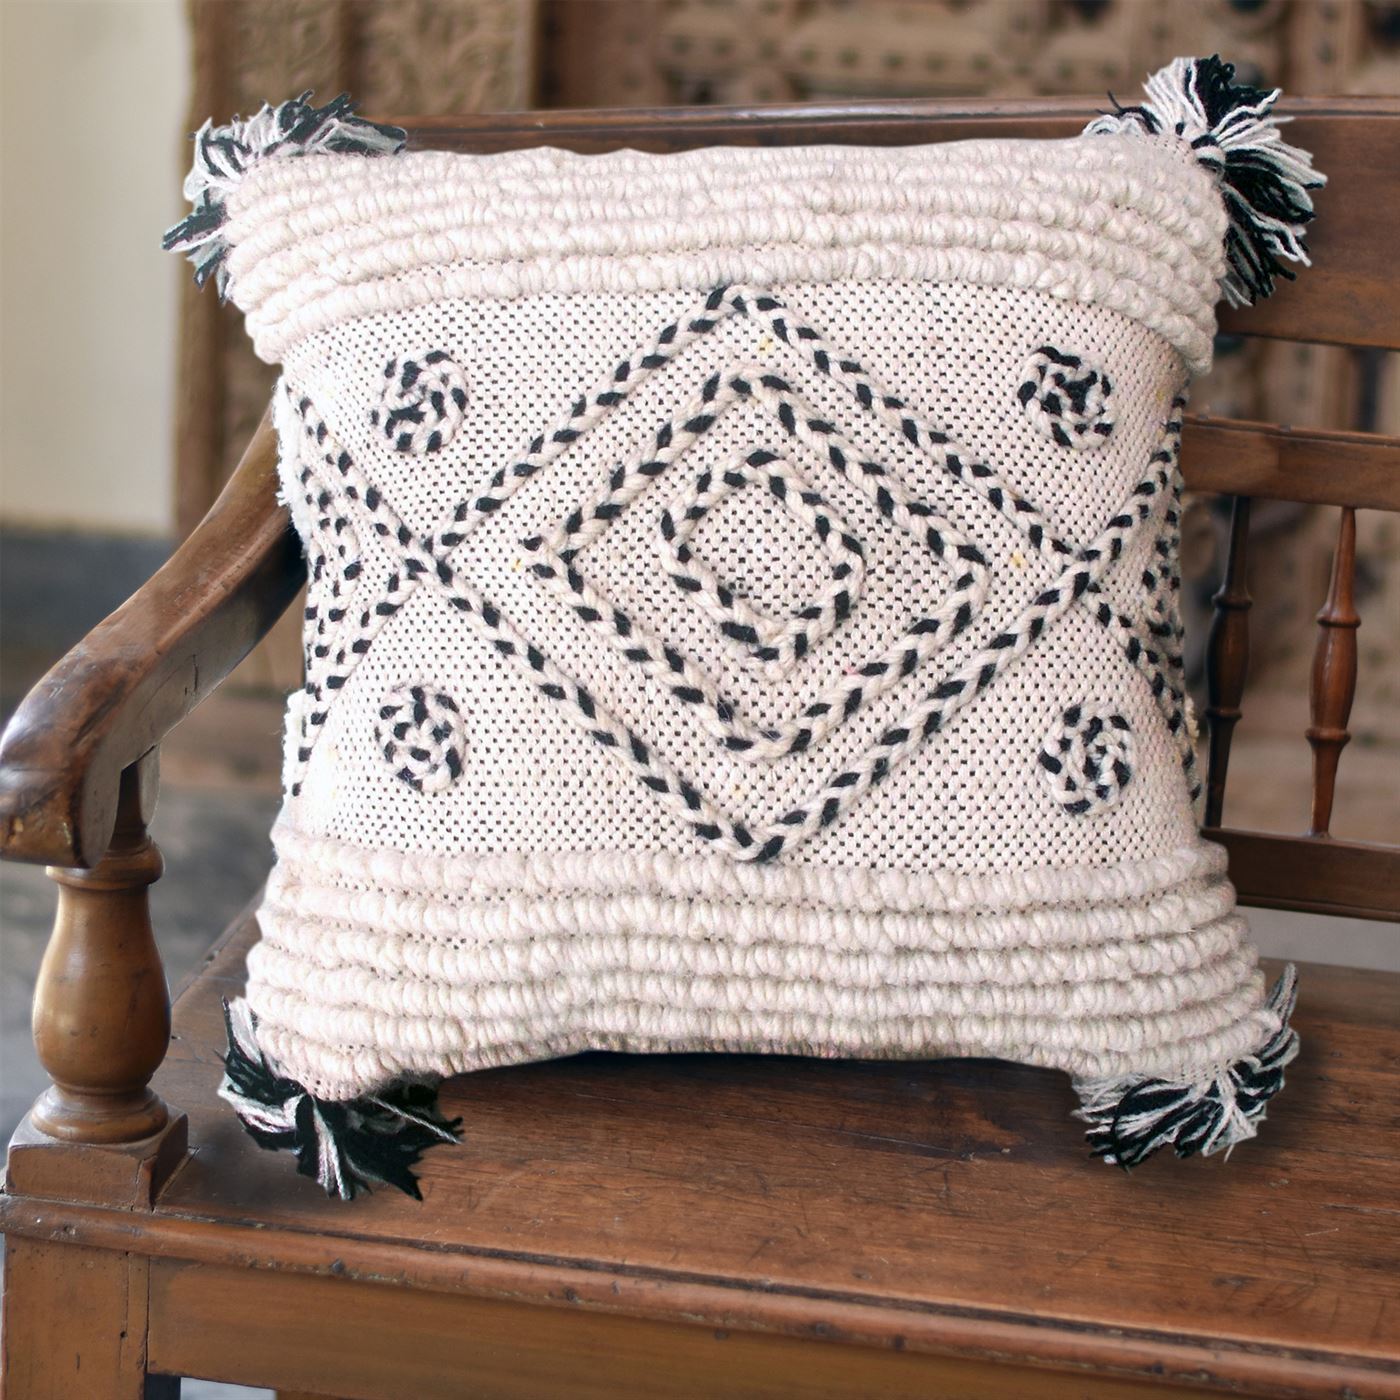 Yapen Pillow, Wool, Natural White, Charcoal, Pitloom, All Loop